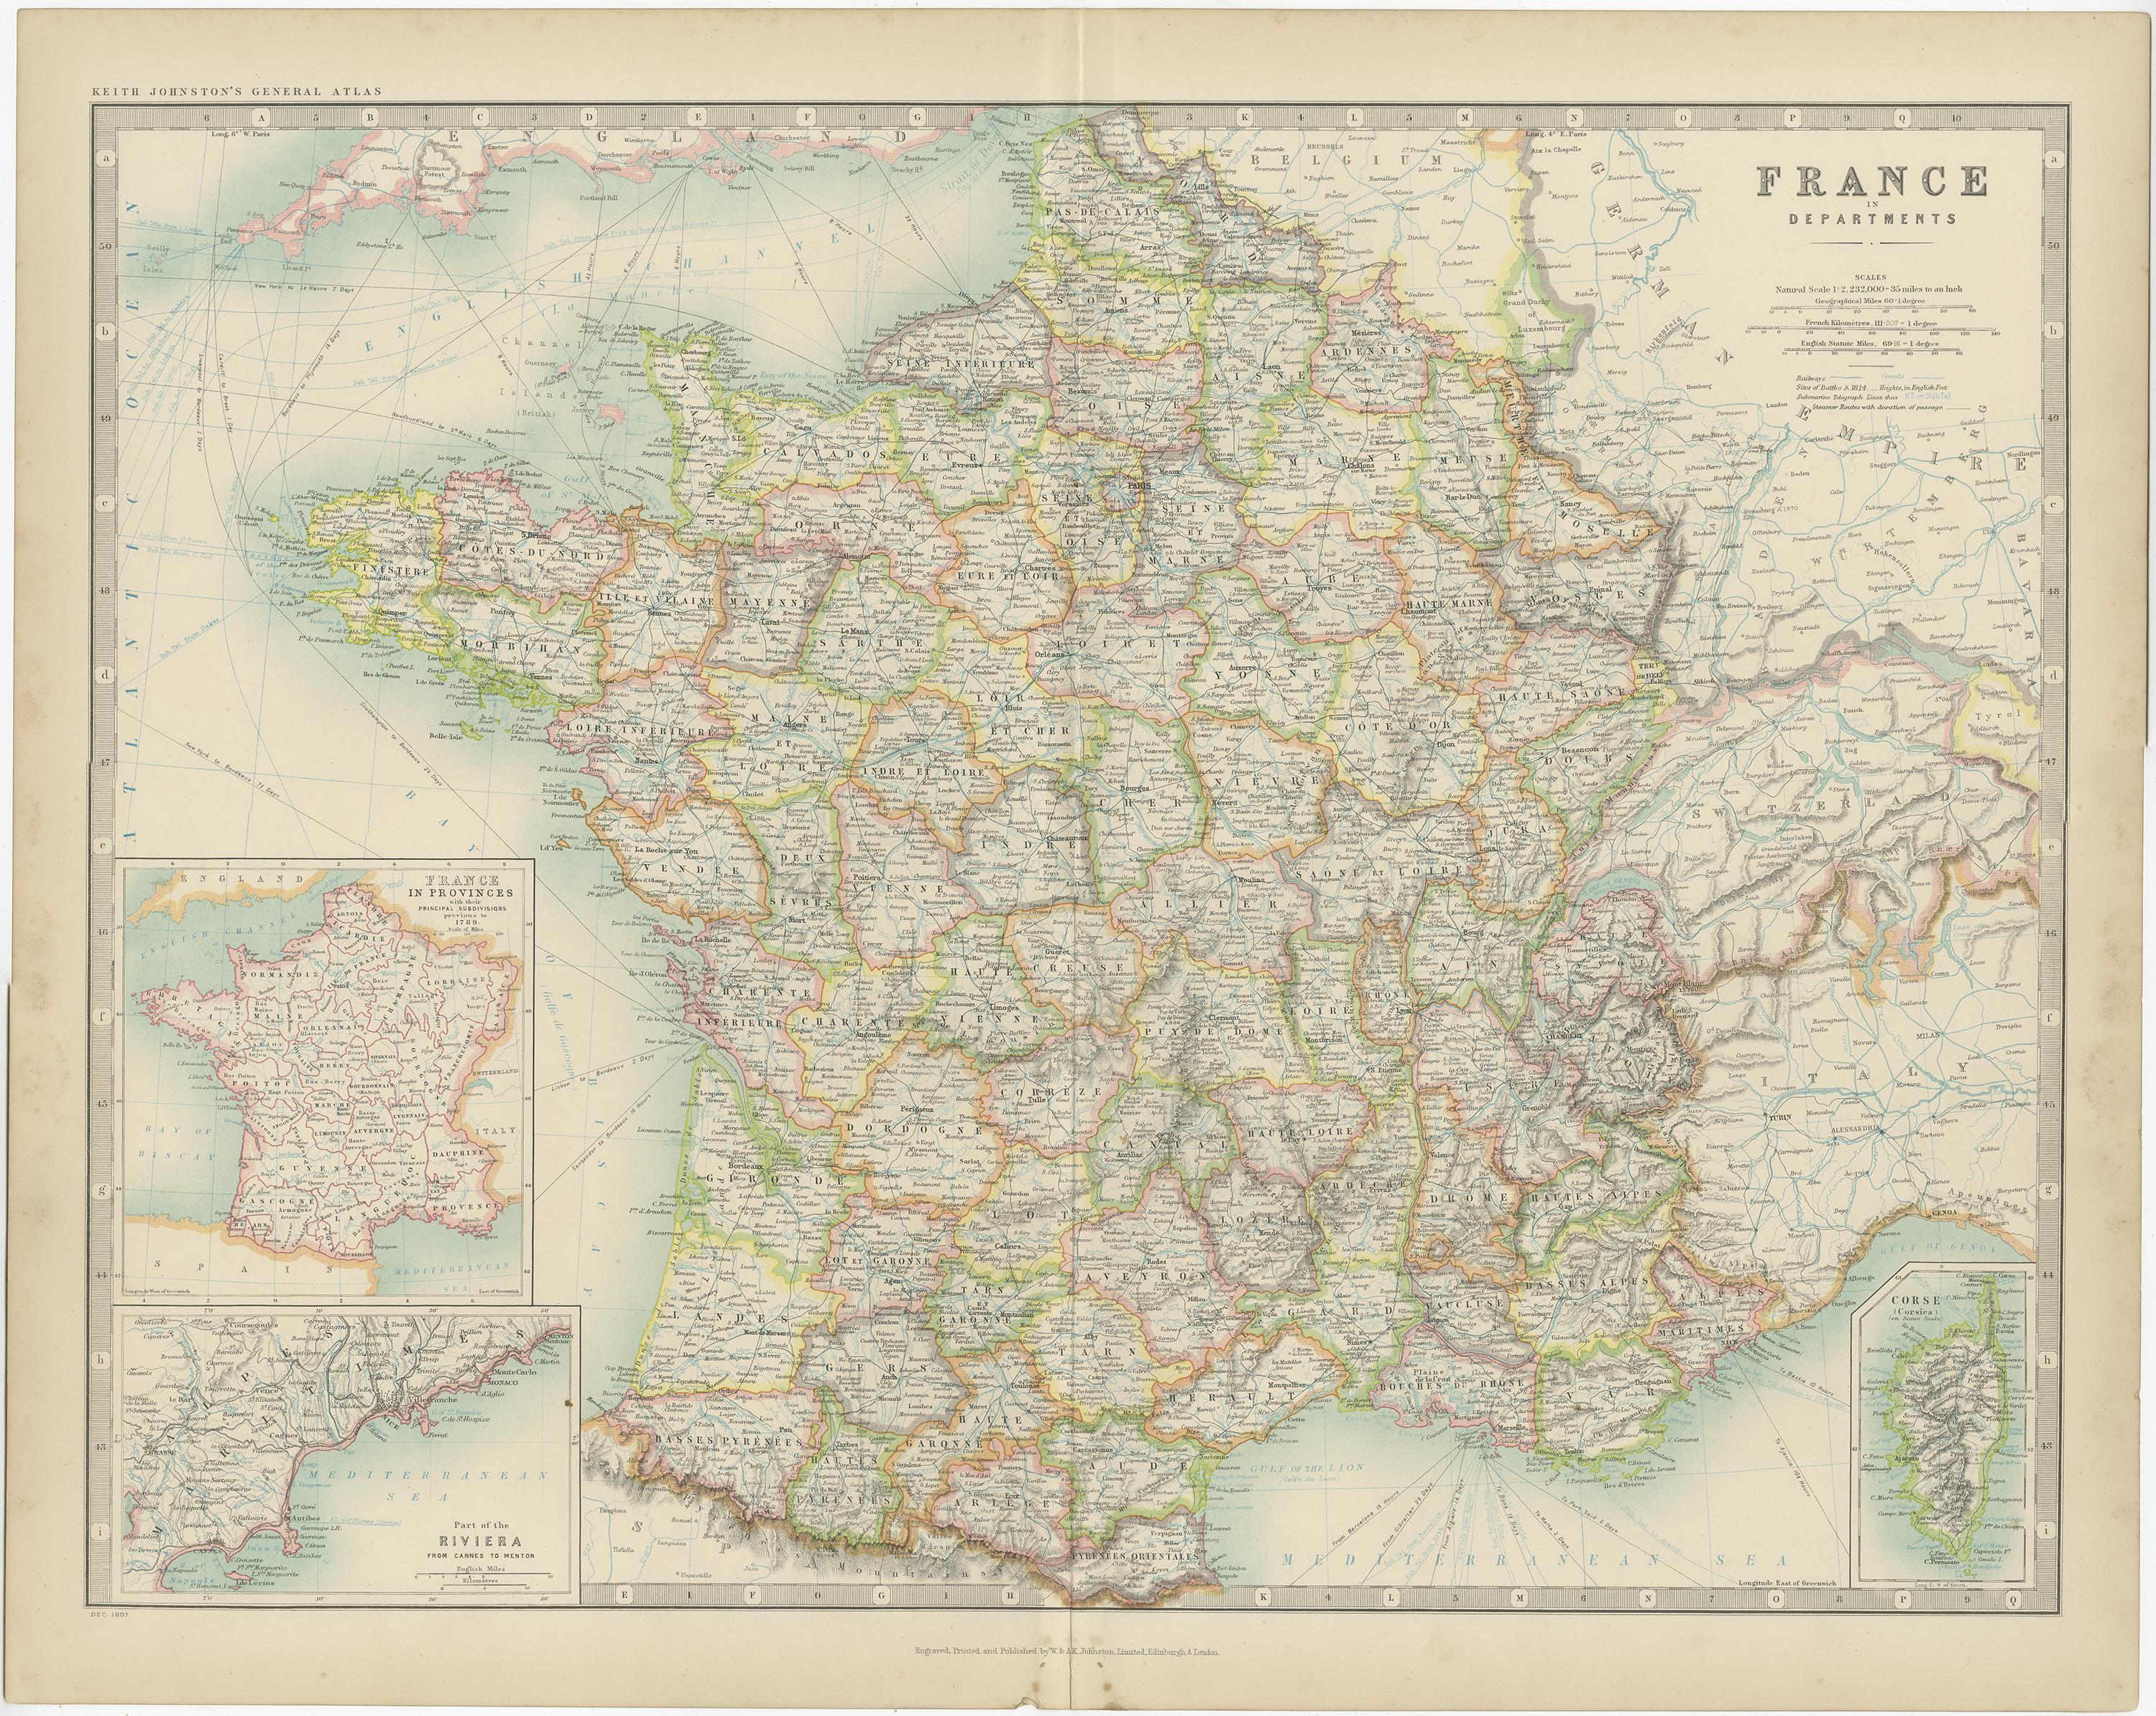 Antique map titled 'France'. Original antique map of France. With inset maps of France in provinces, part of the Riviera and Corsica. This map originates from the ‘Royal Atlas of Modern Geography’. Published by W. & A.K. Johnston, 1909.